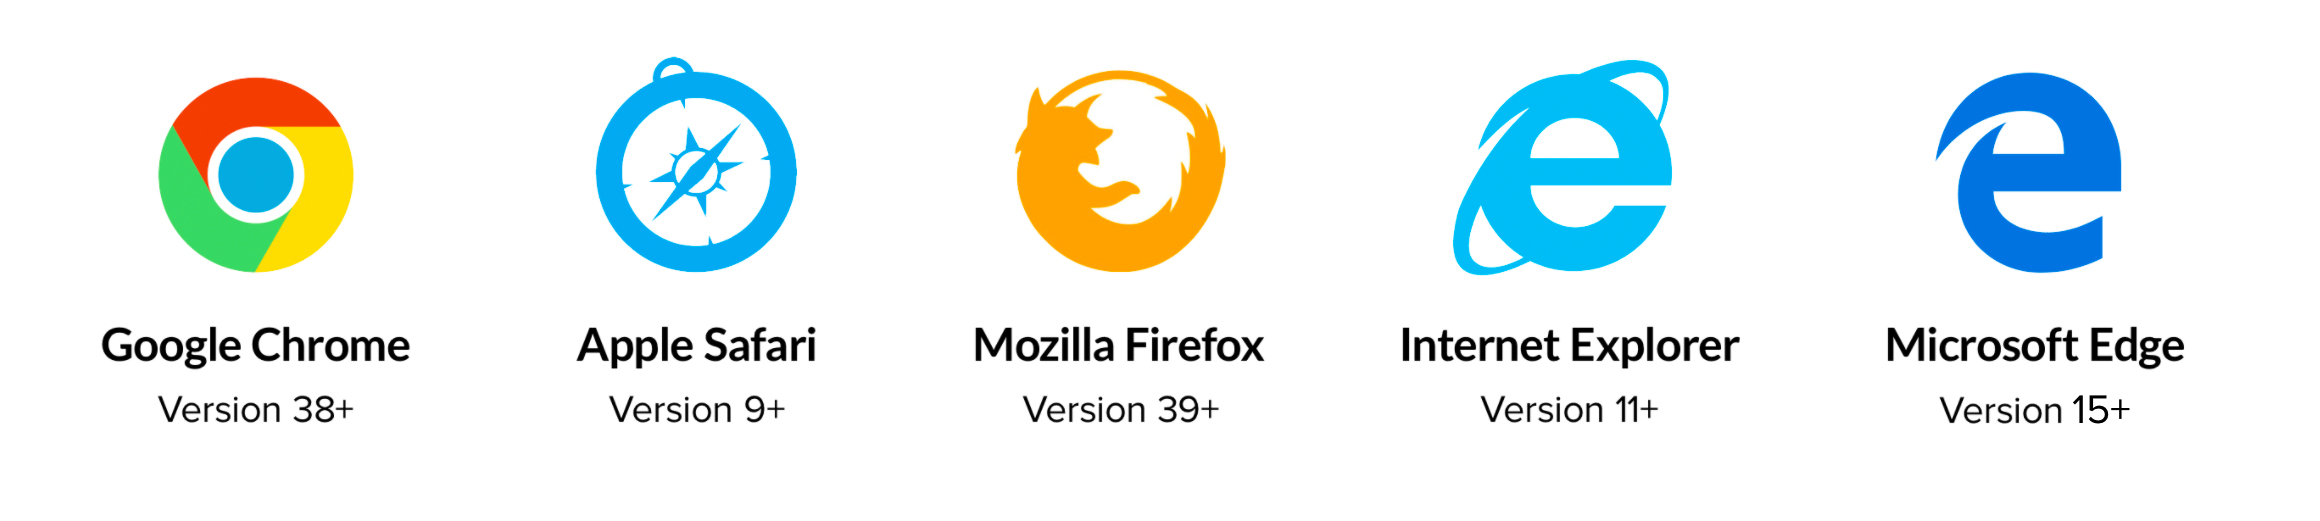 is firefox code is same for both windows and mac system